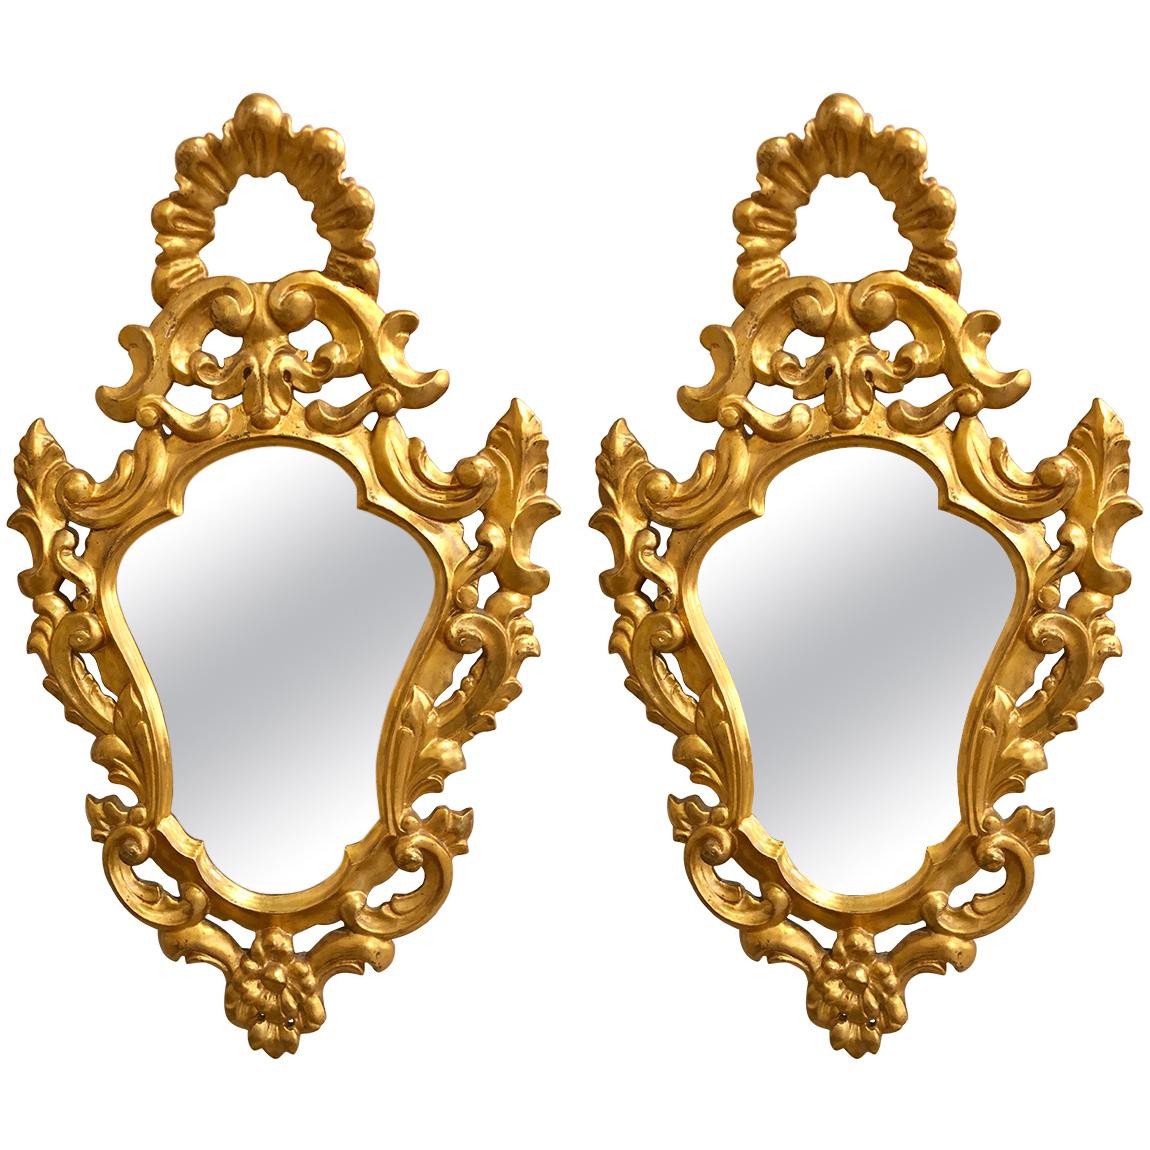 Pair of Italian Rococo Wall Mirrors, Giltwood Carved